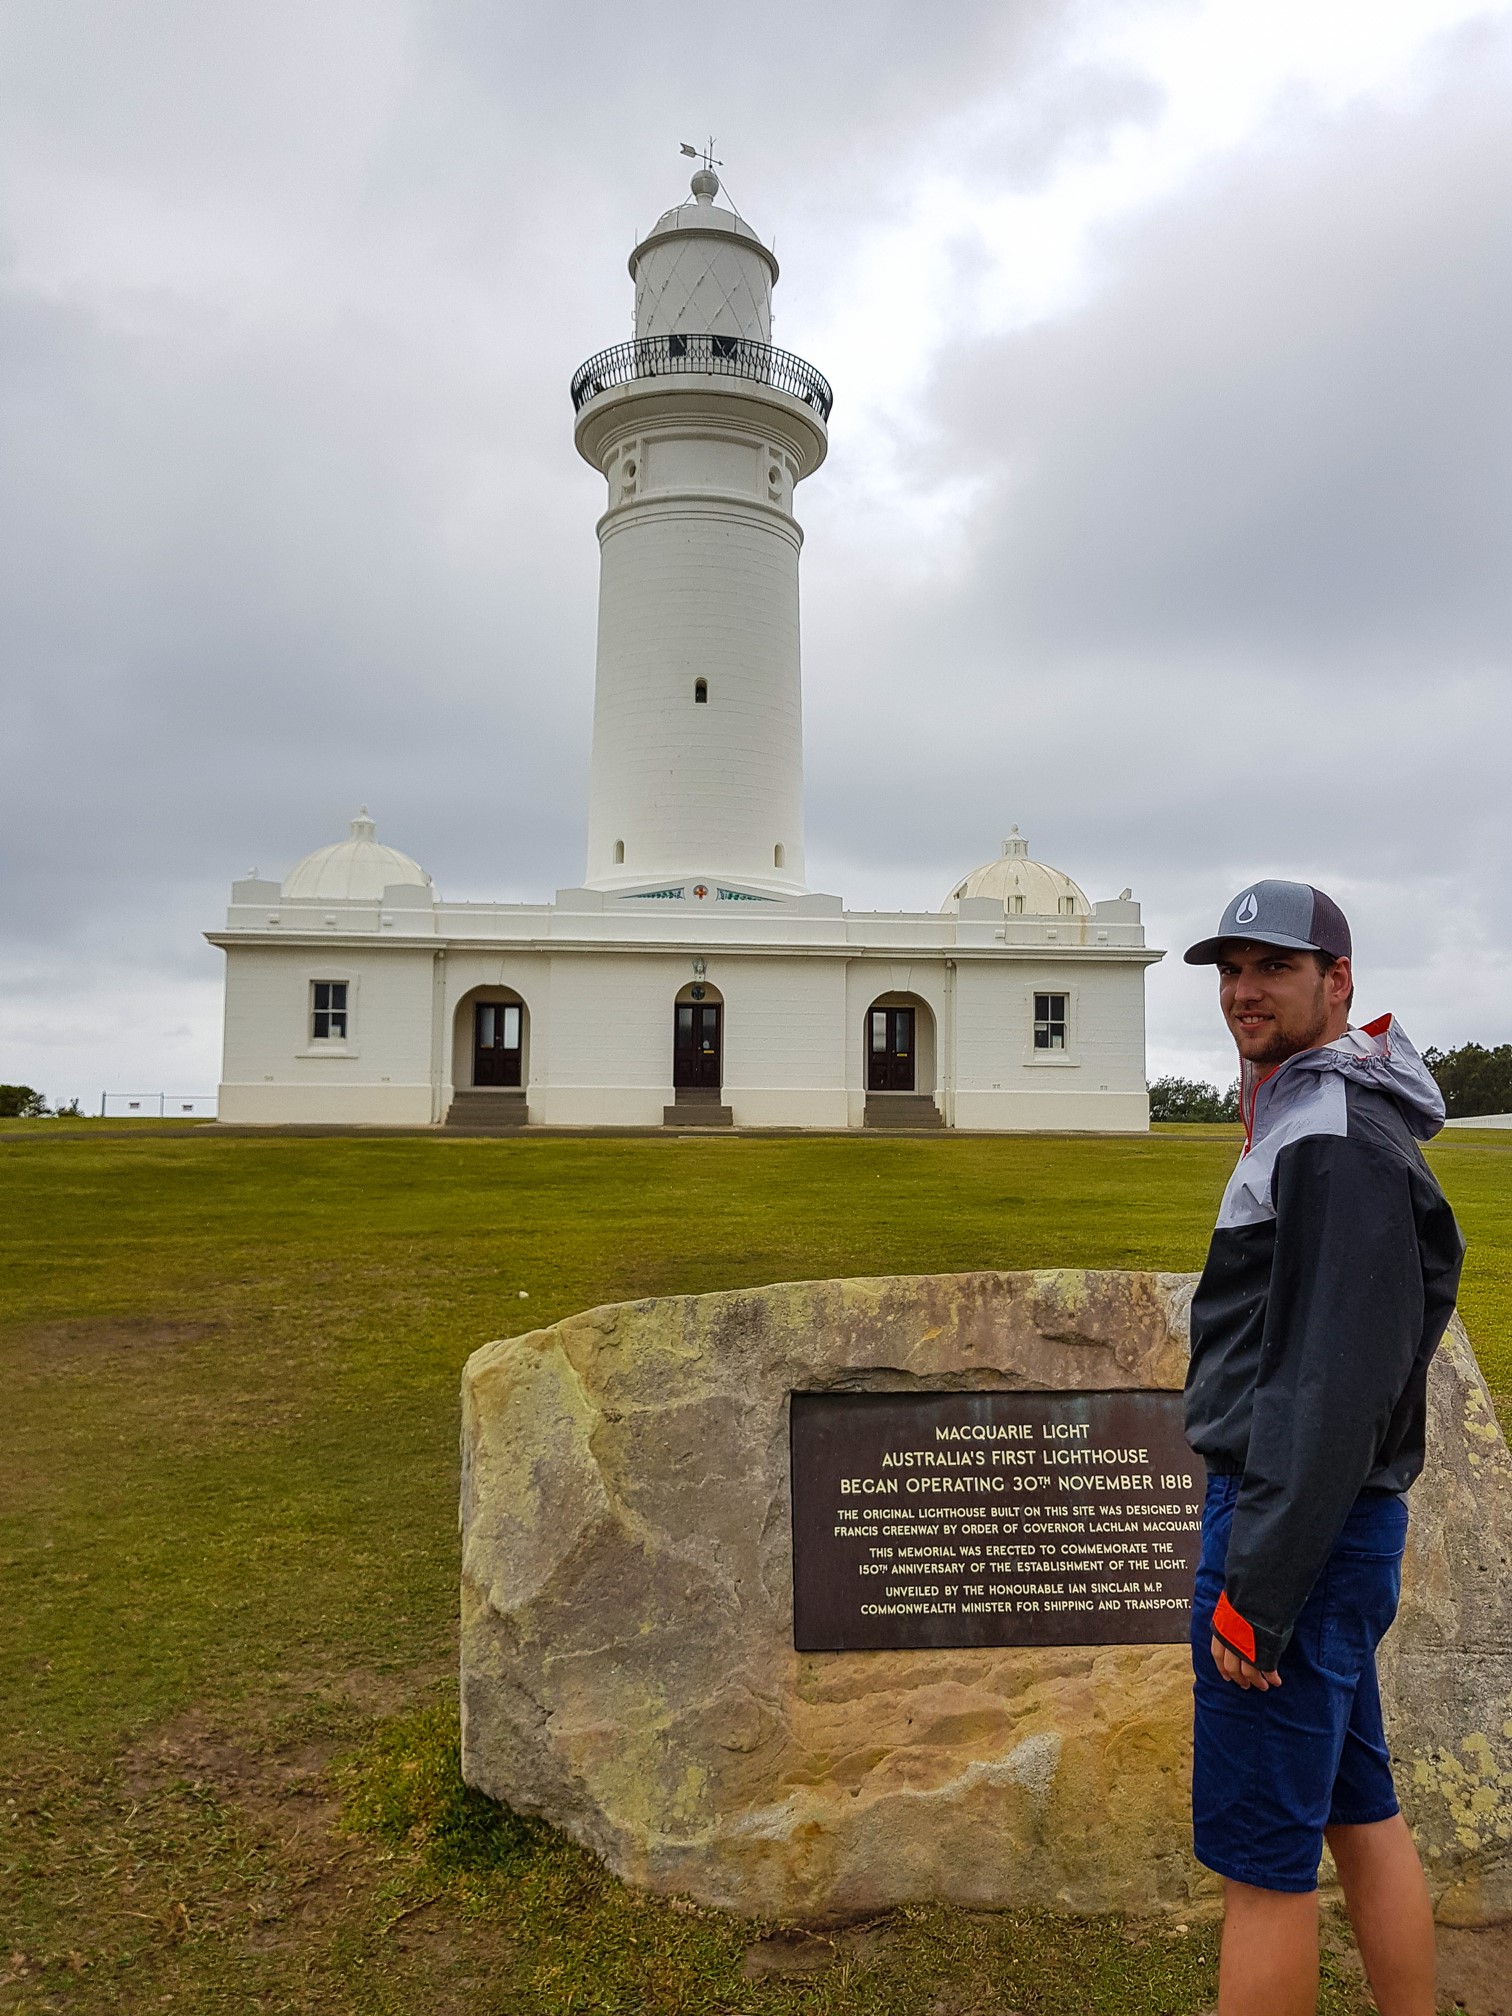 Macquaire Lighthouse the oldest lighthouse in Australia